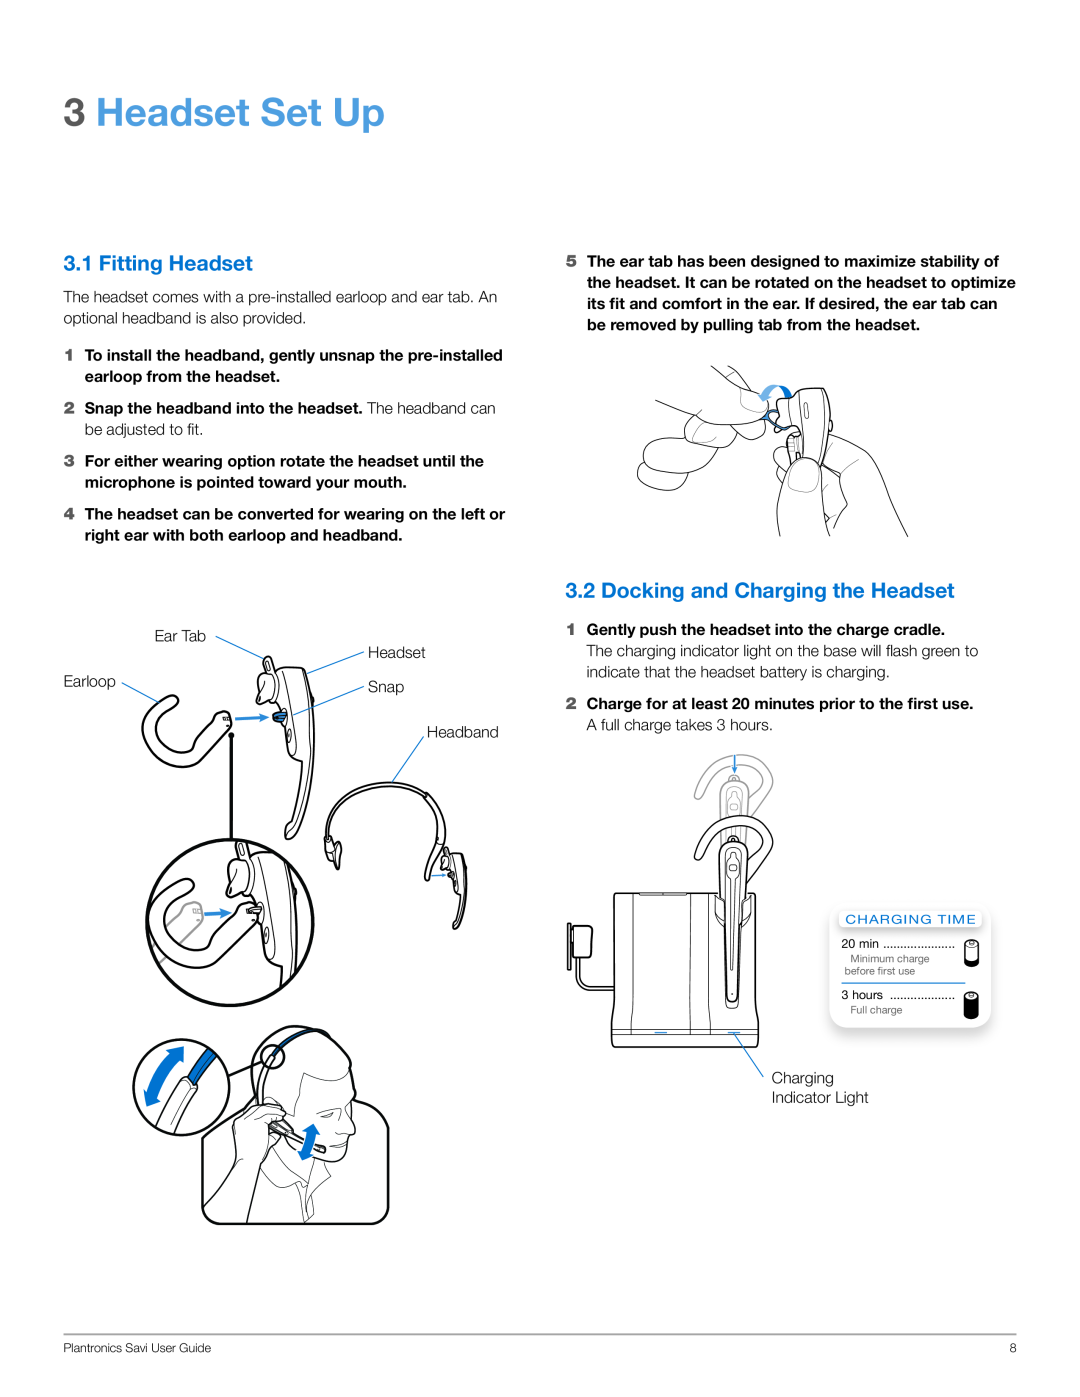 Plantronics WO100 manual Headset Set Up, Fitting Headset, Docking and Charging the Headset 